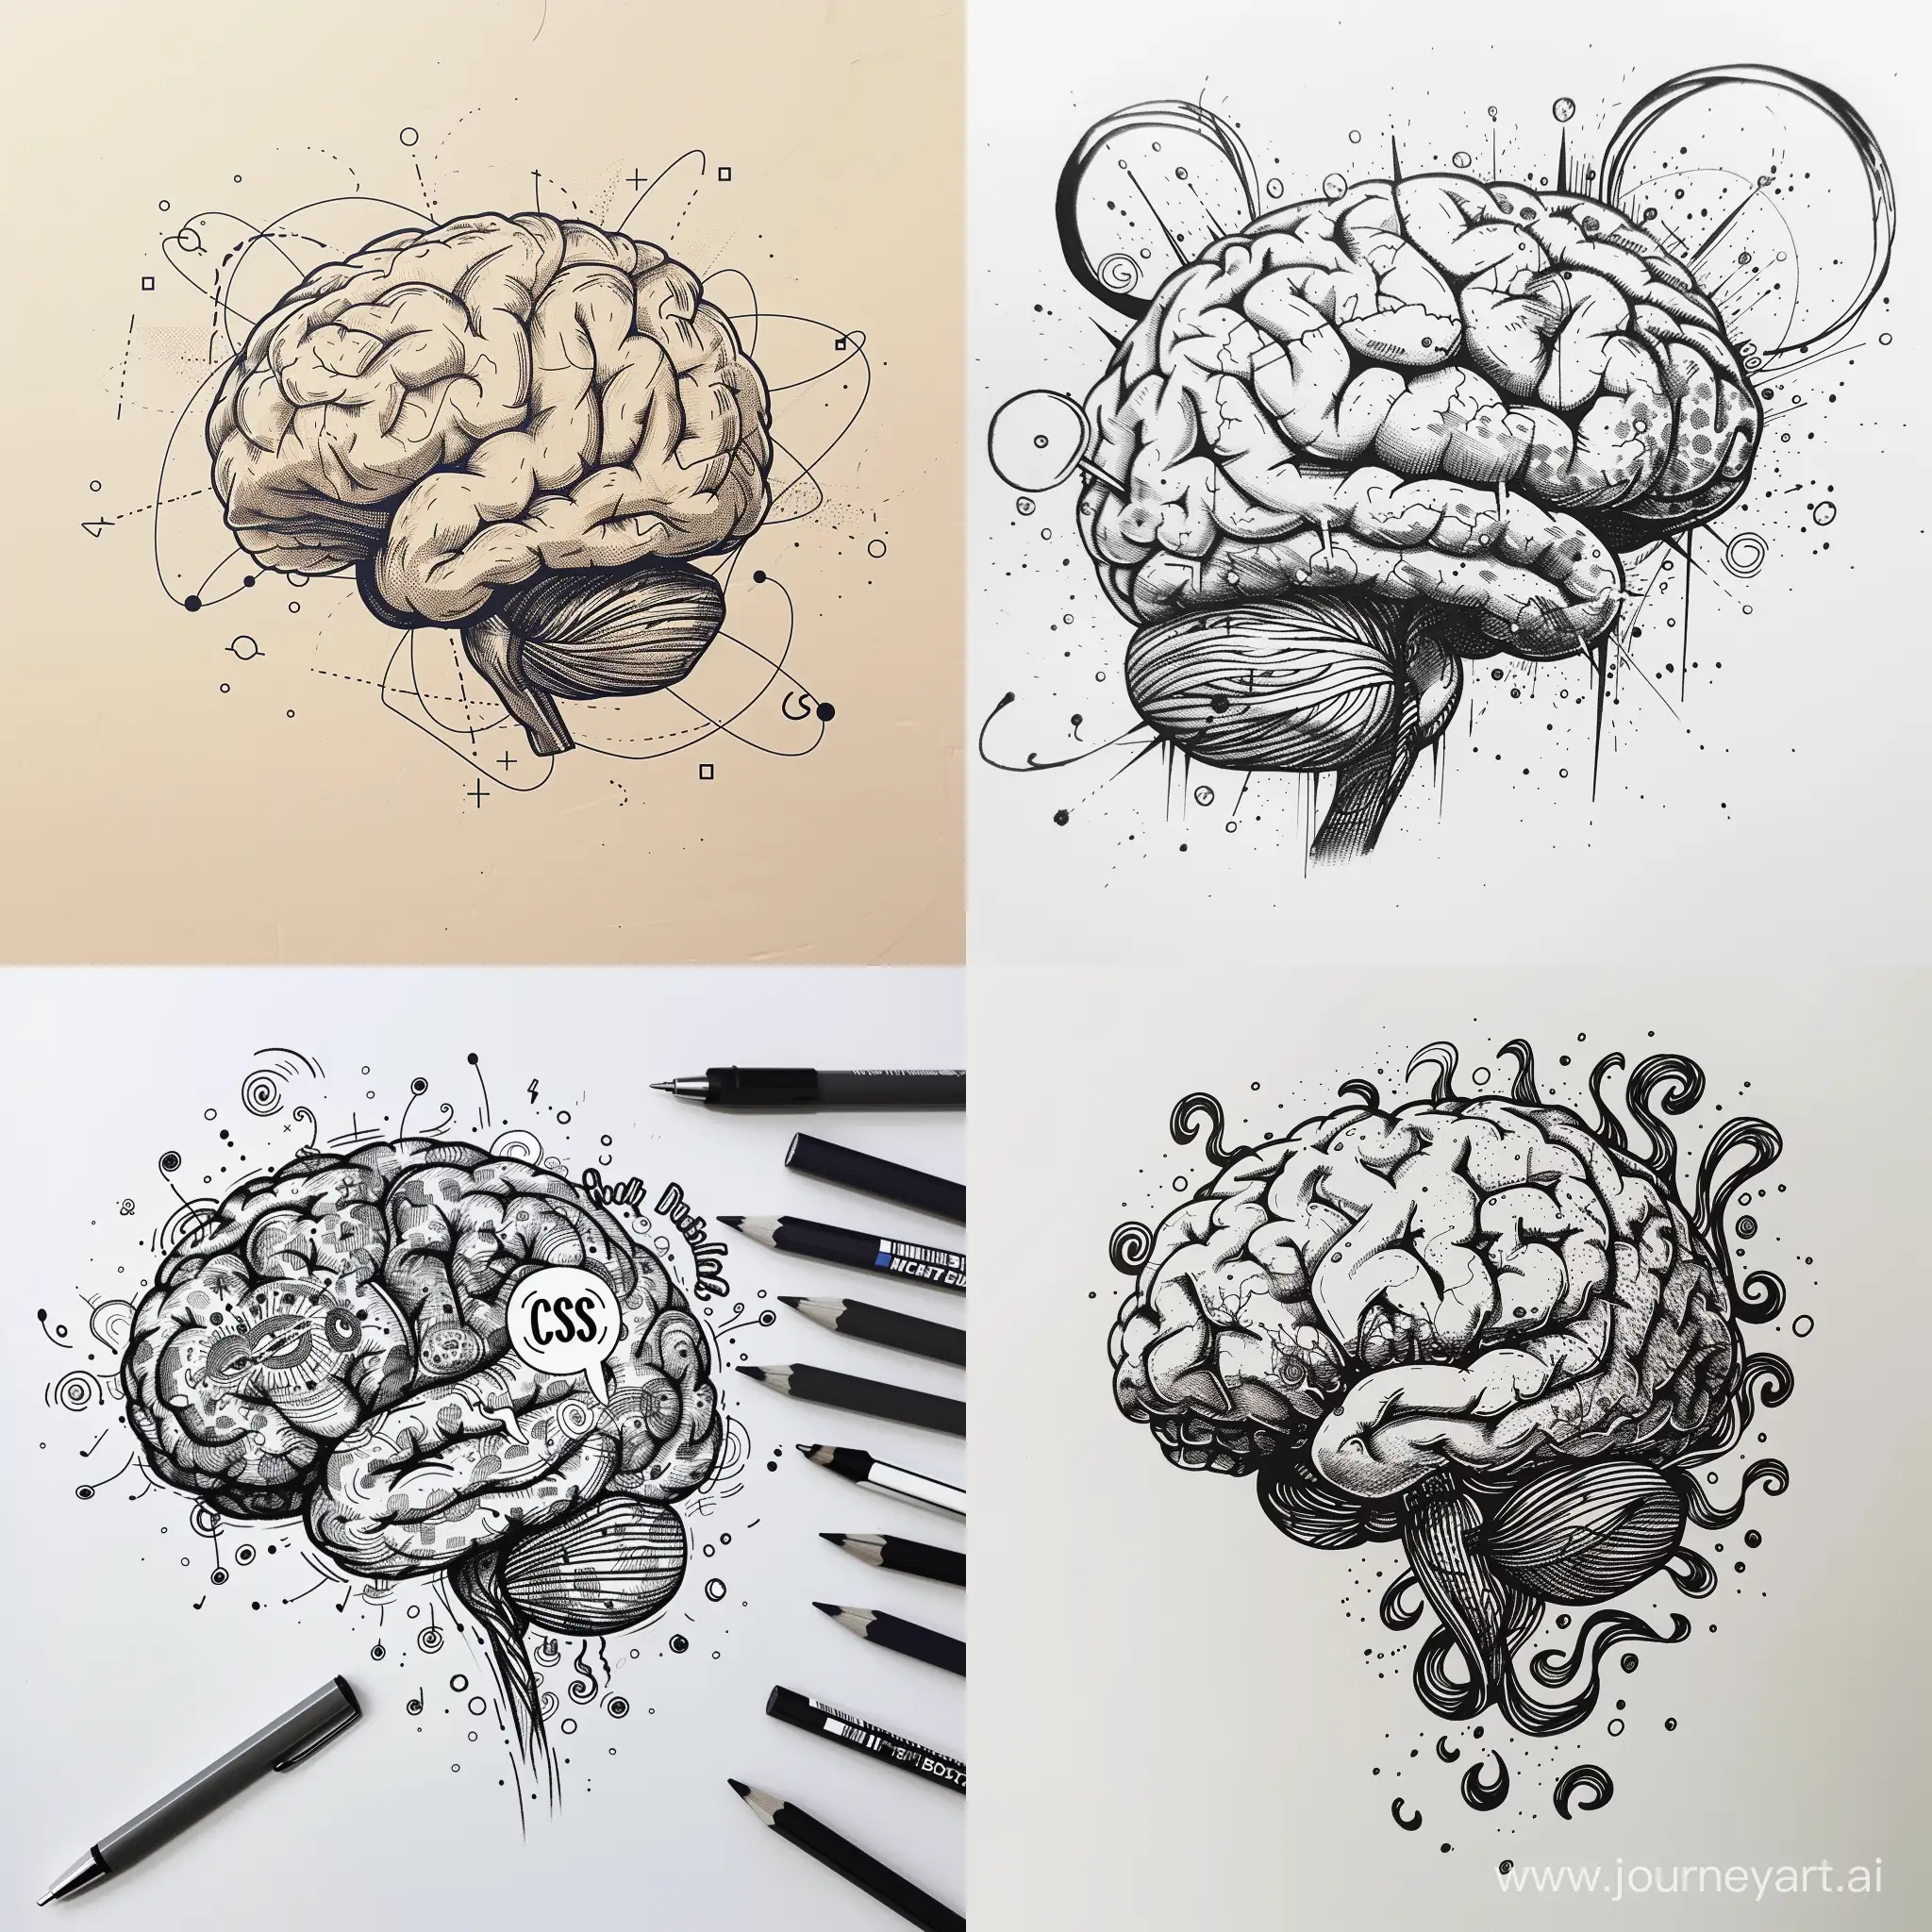 Creative-Brain-Doodle-with-Computer-Science-Concept